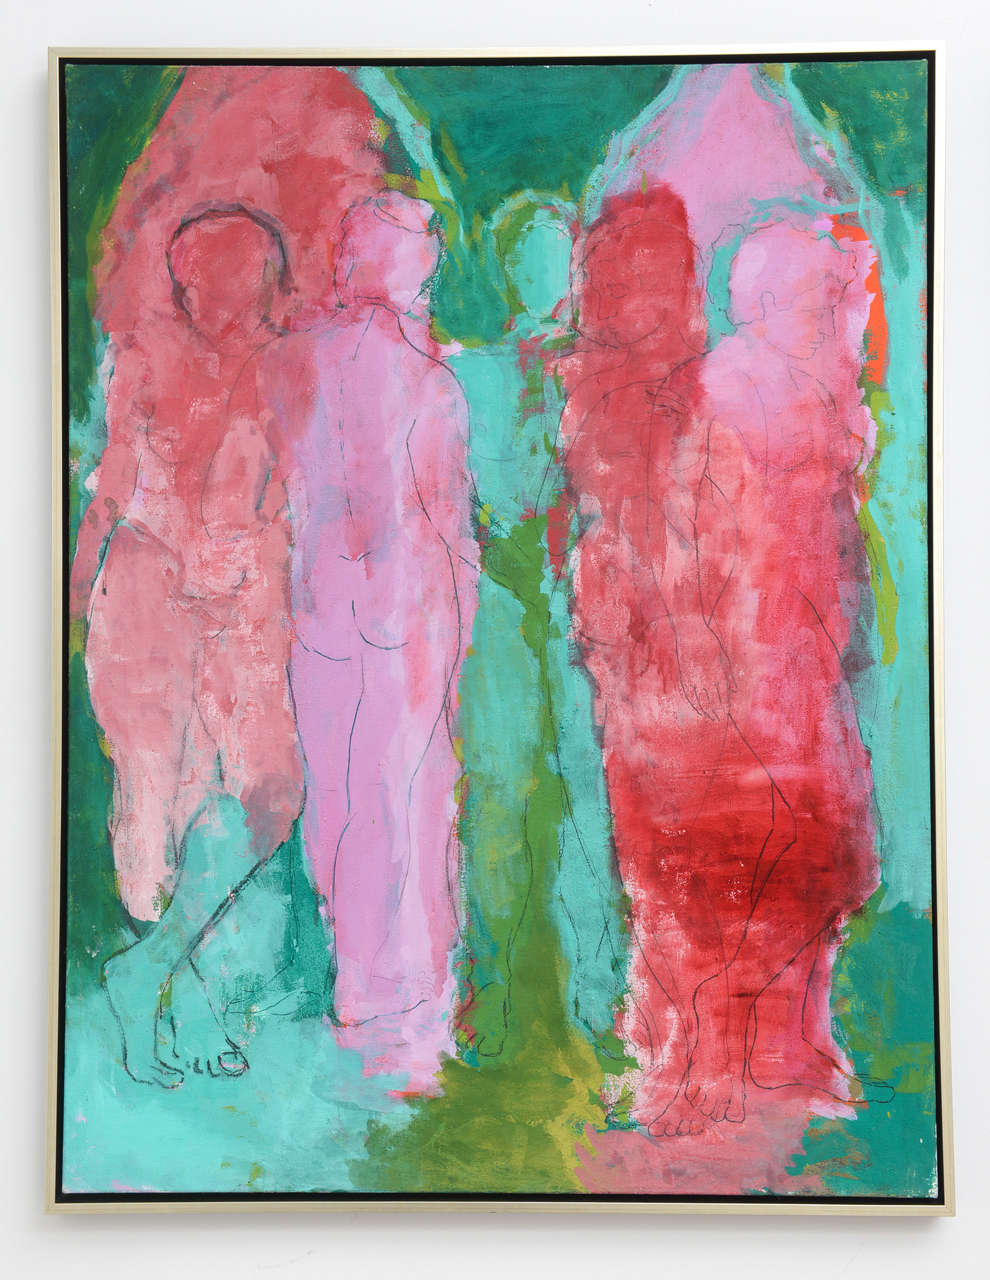 Abstract modernist oil on canvas painting of obscure figures by Danish artist Jan Sivertsen. The color palette includes pink, fuschia, teal and greens. It is in a simple frame.